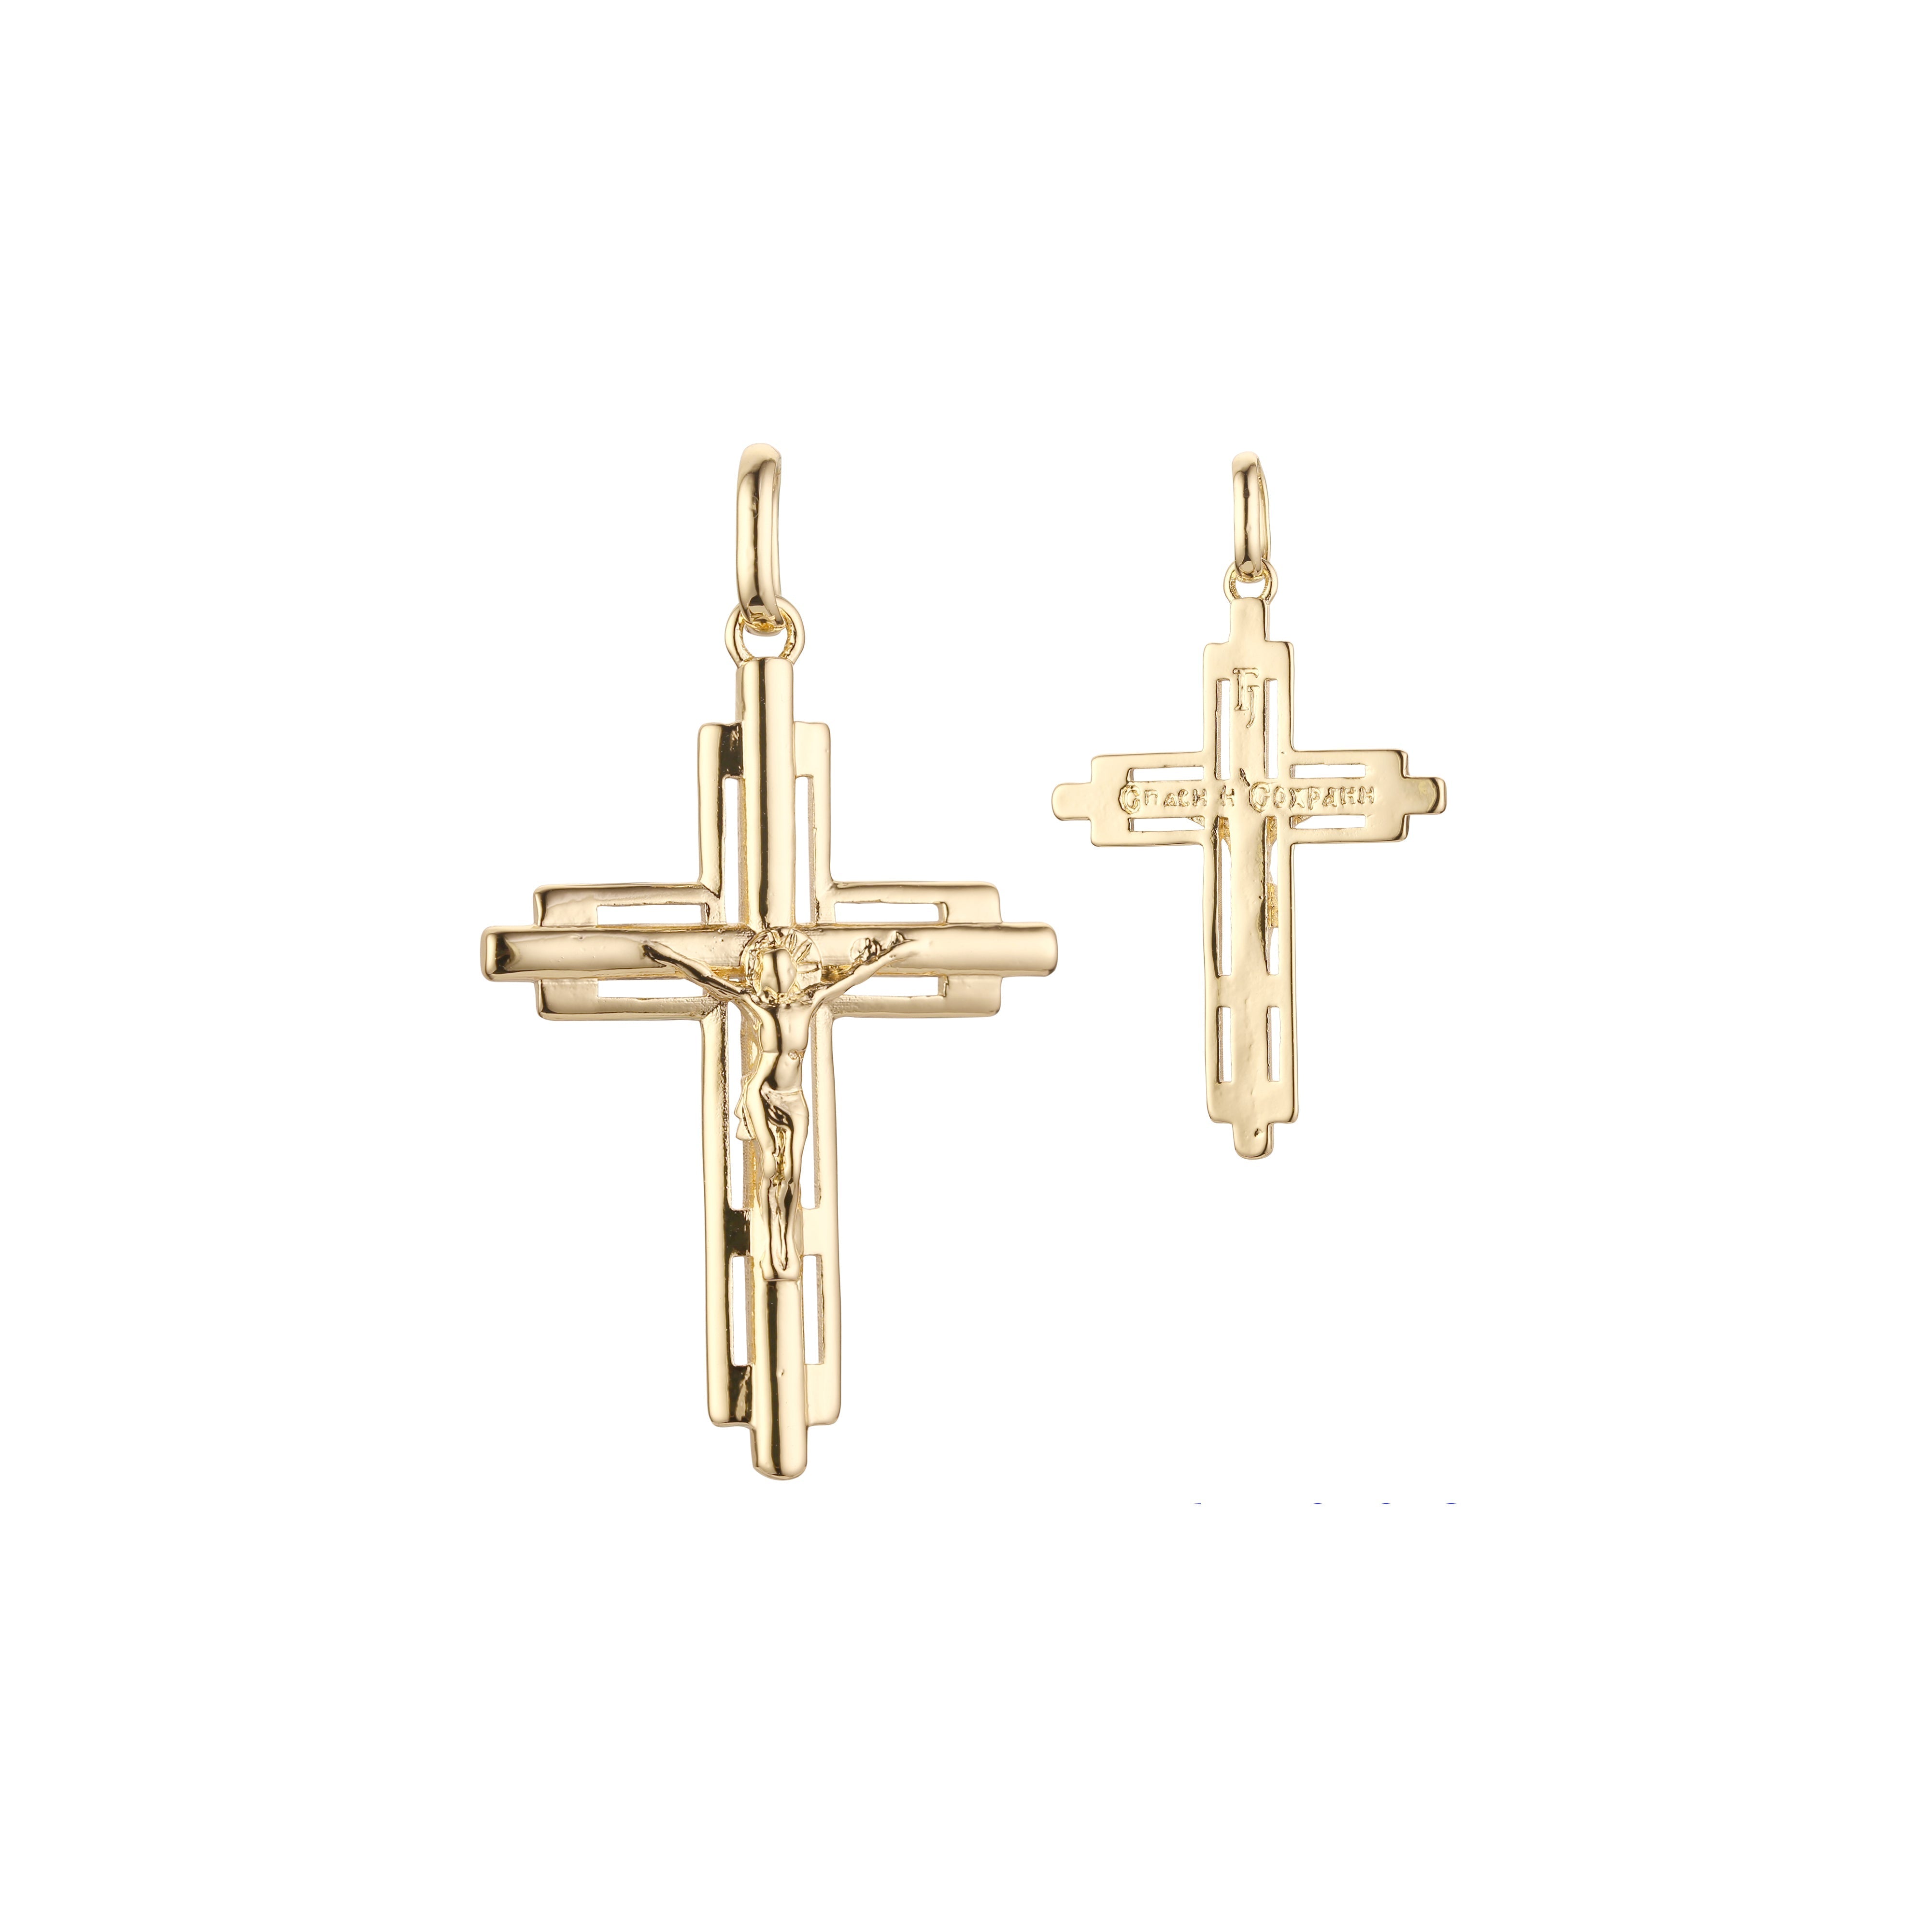 Catholic Latin cross pendant in Rose Gold two tone, 14K Gold plating colors